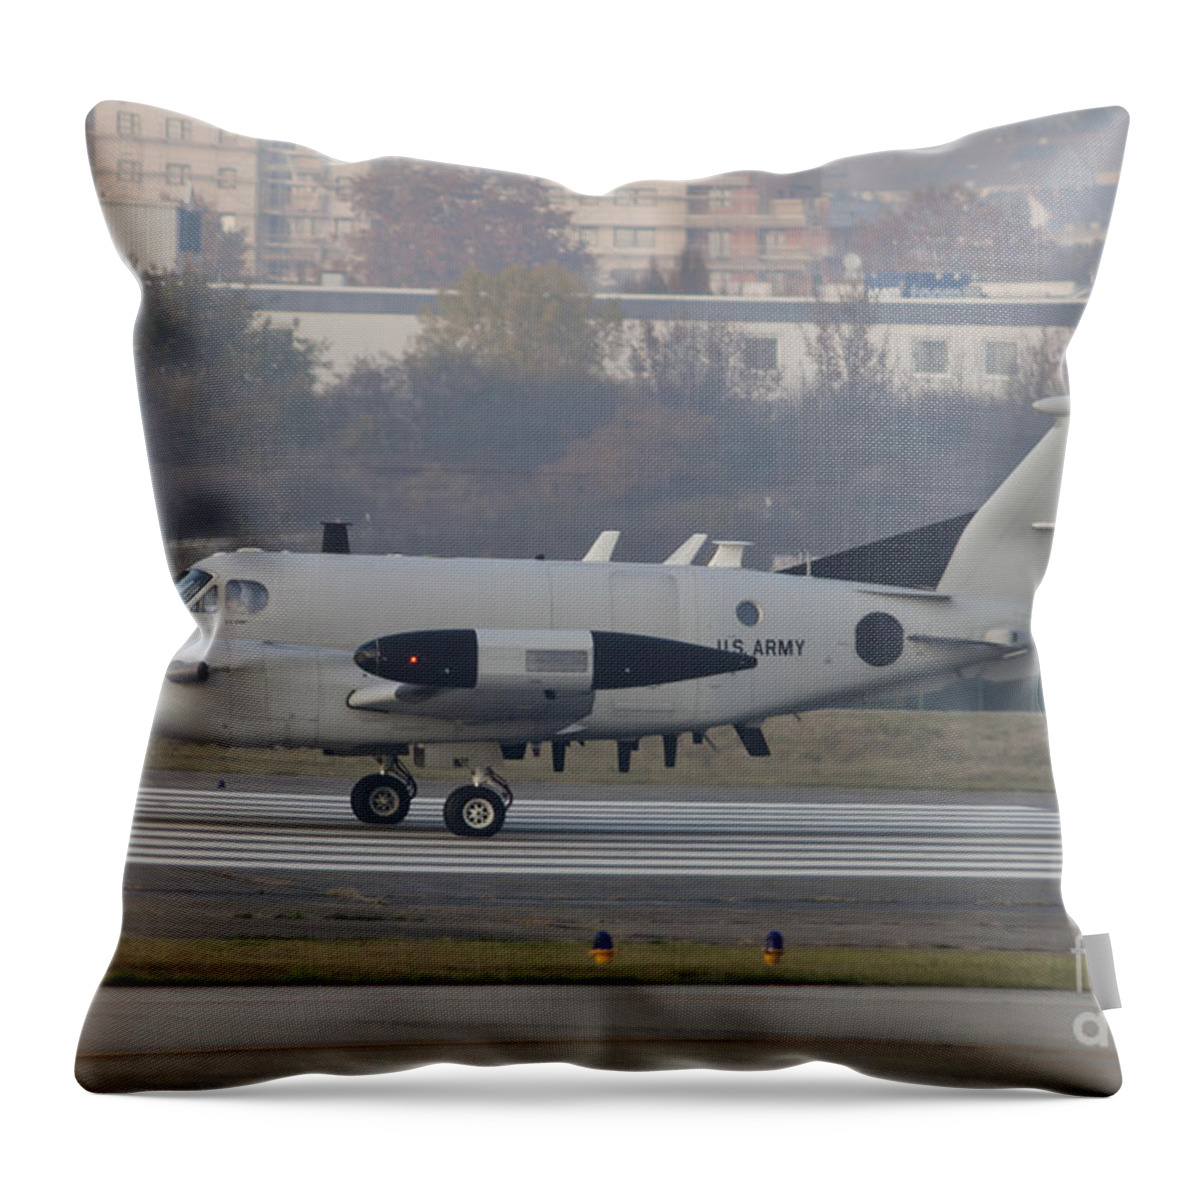 Germany Throw Pillow featuring the photograph An Rc-12x Guardrail At Wiesbaden U.s by Timm Ziegenthaler